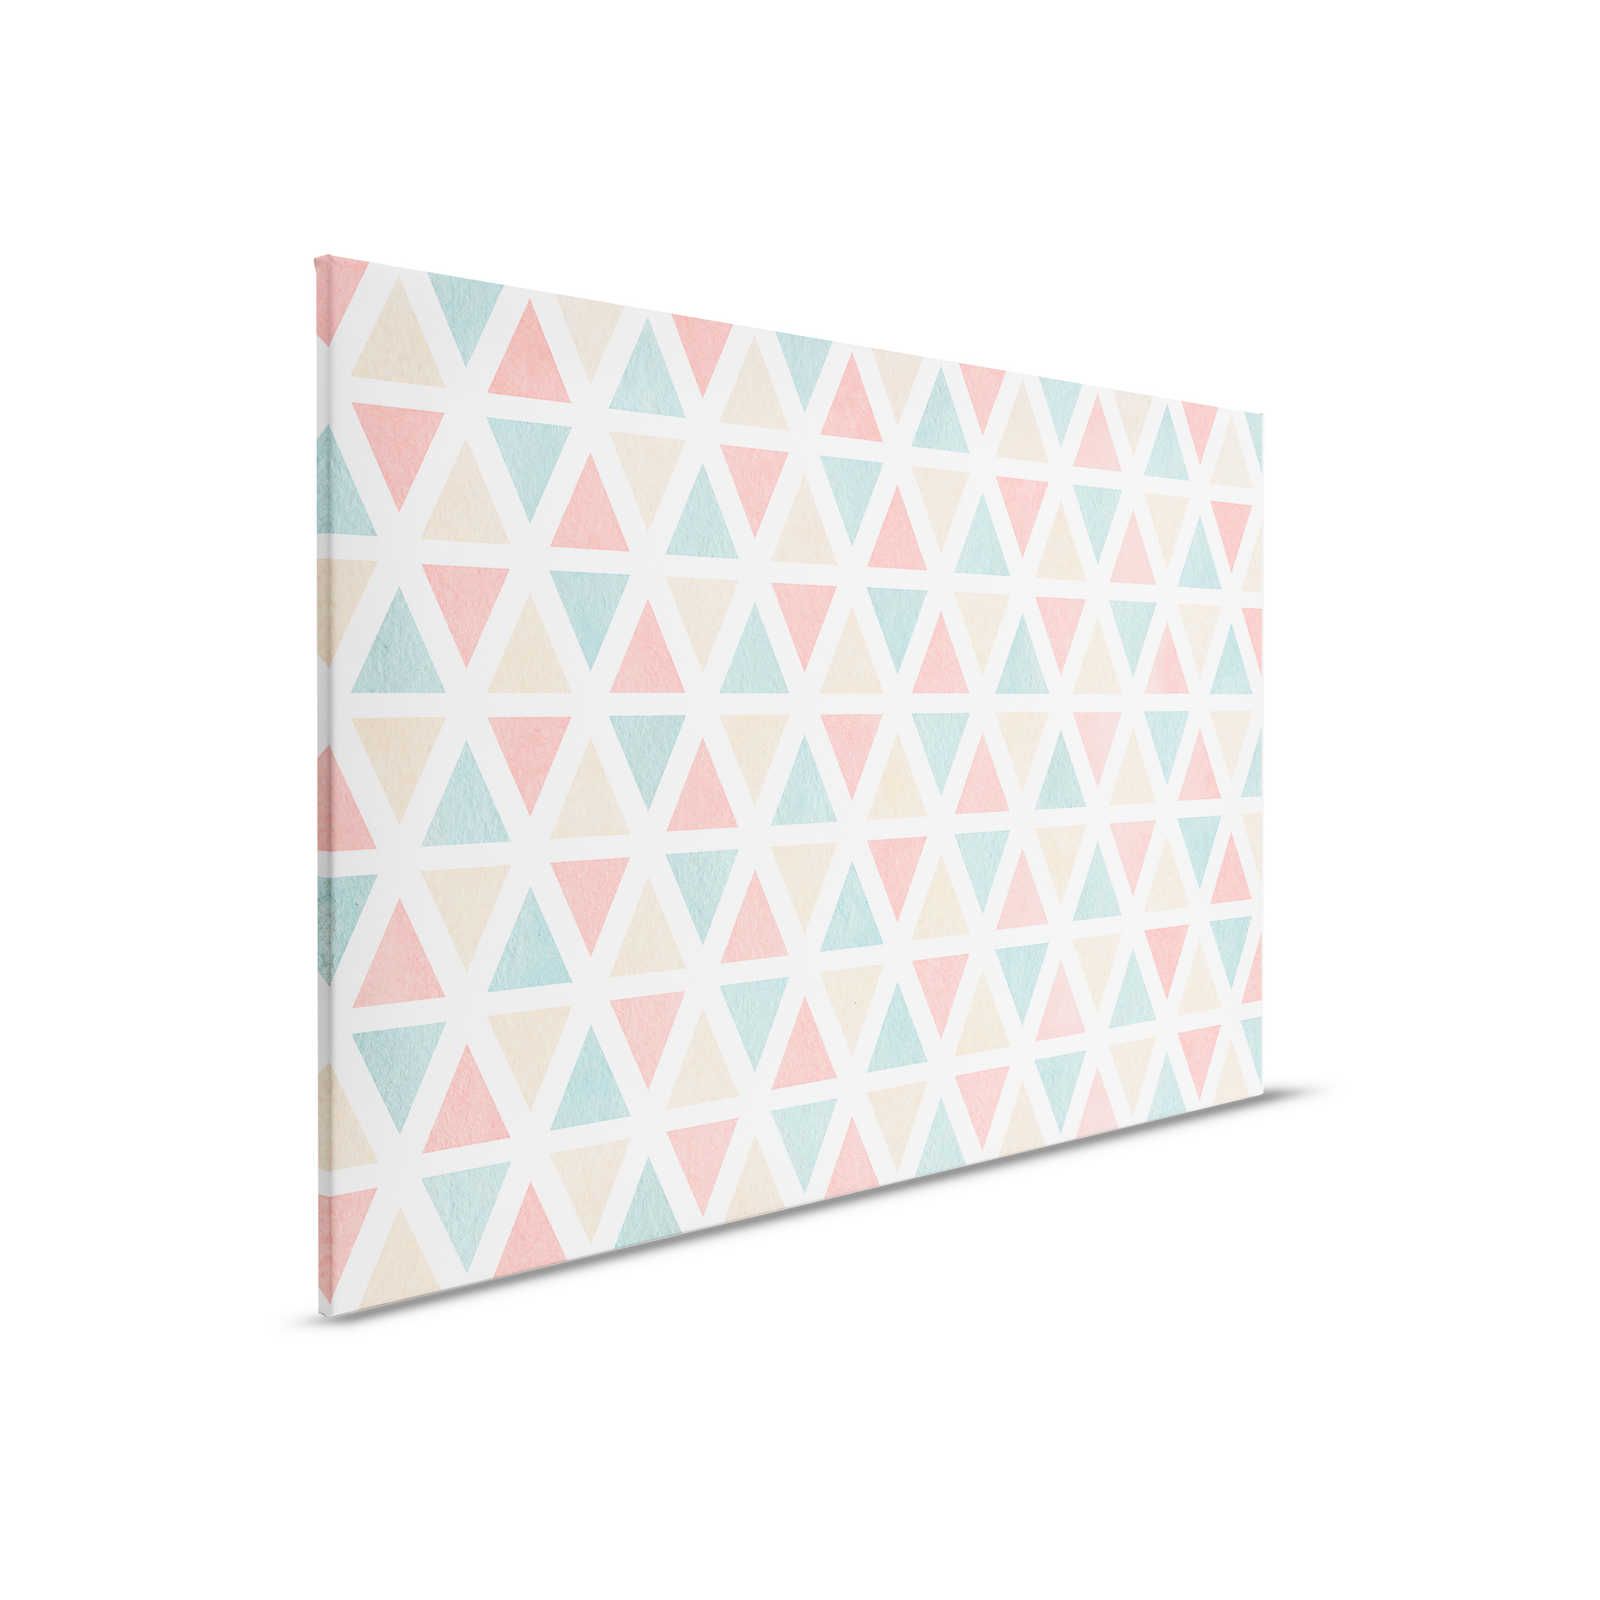         Canvas graphic pattern with colourful triangles - 90 cm x 60 cm
    